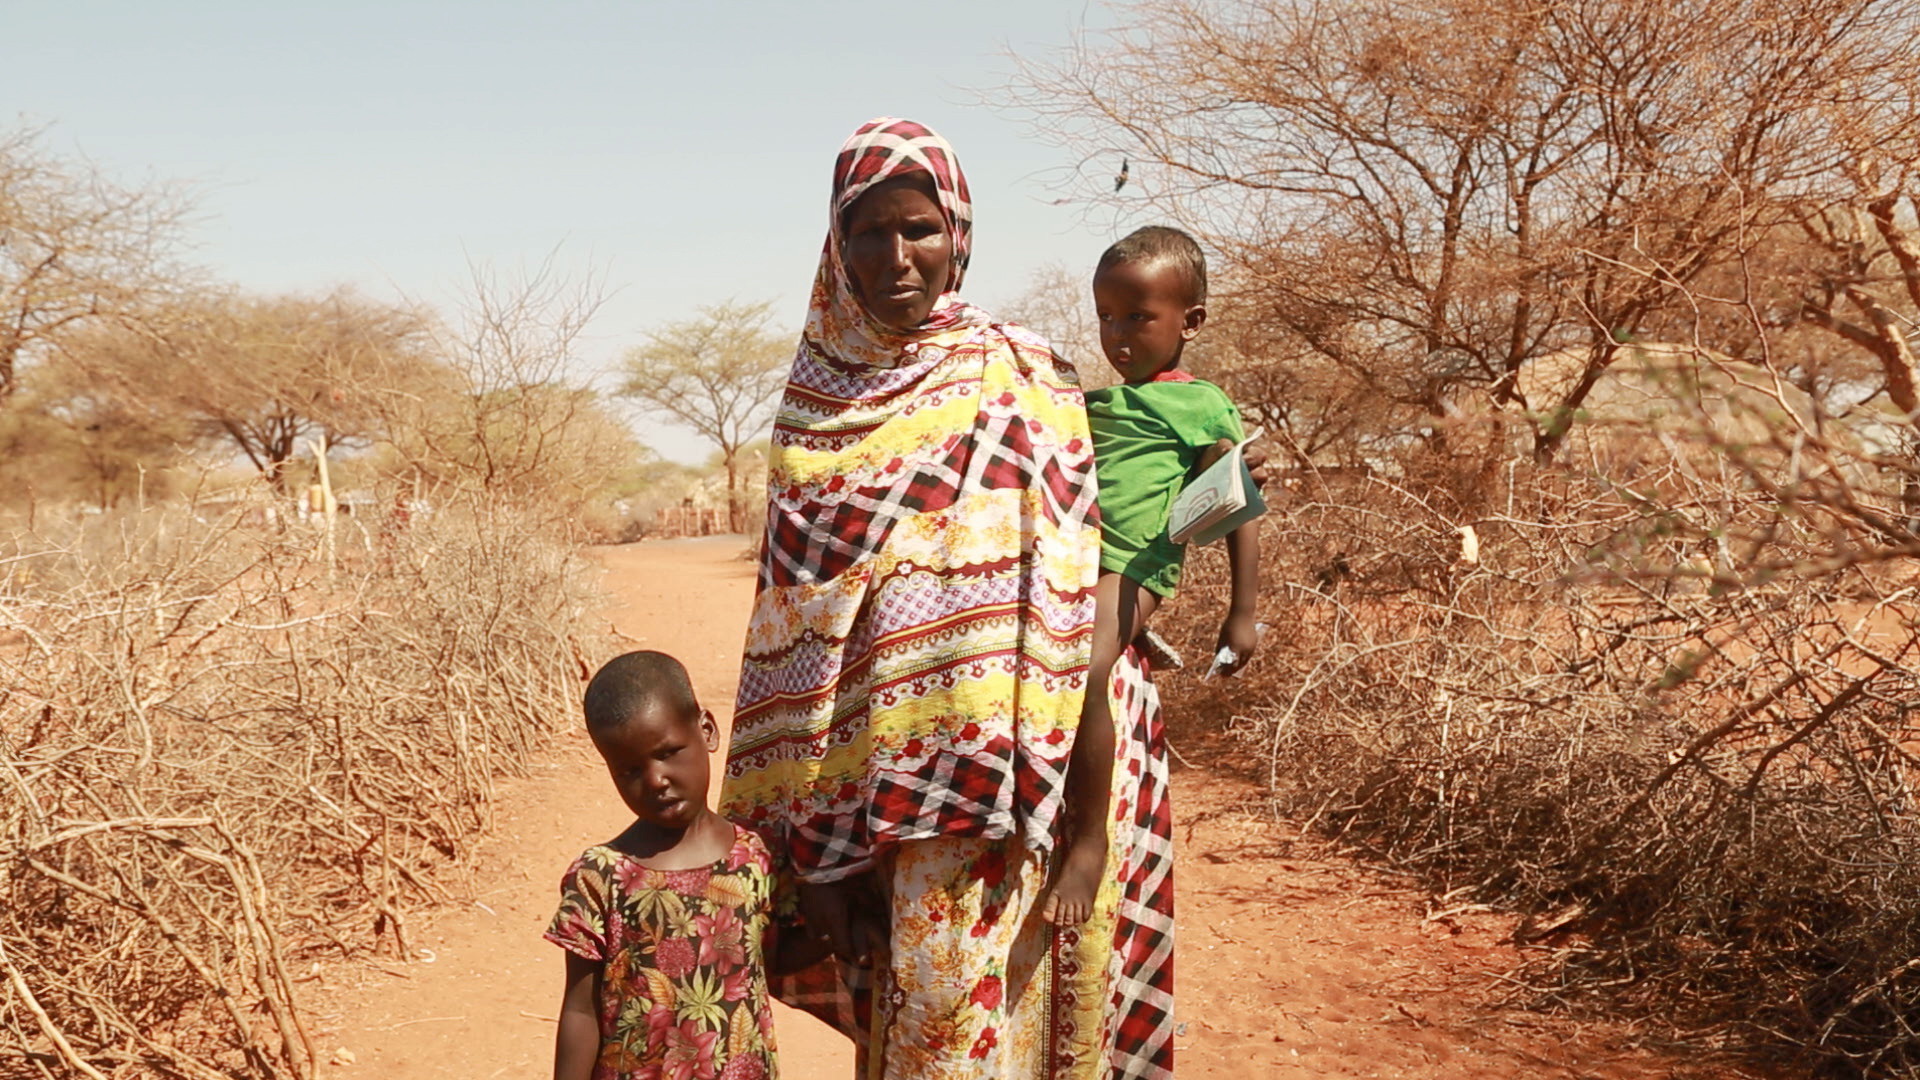 Mother with two young children stand against backdrop of dried out trees and bushes in Kenya